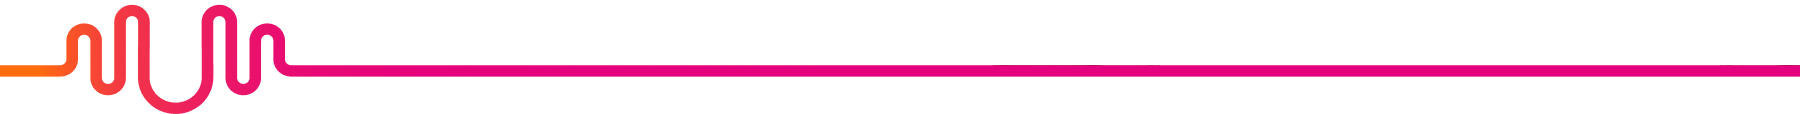 A pink and black logo with an arrow in the middle.